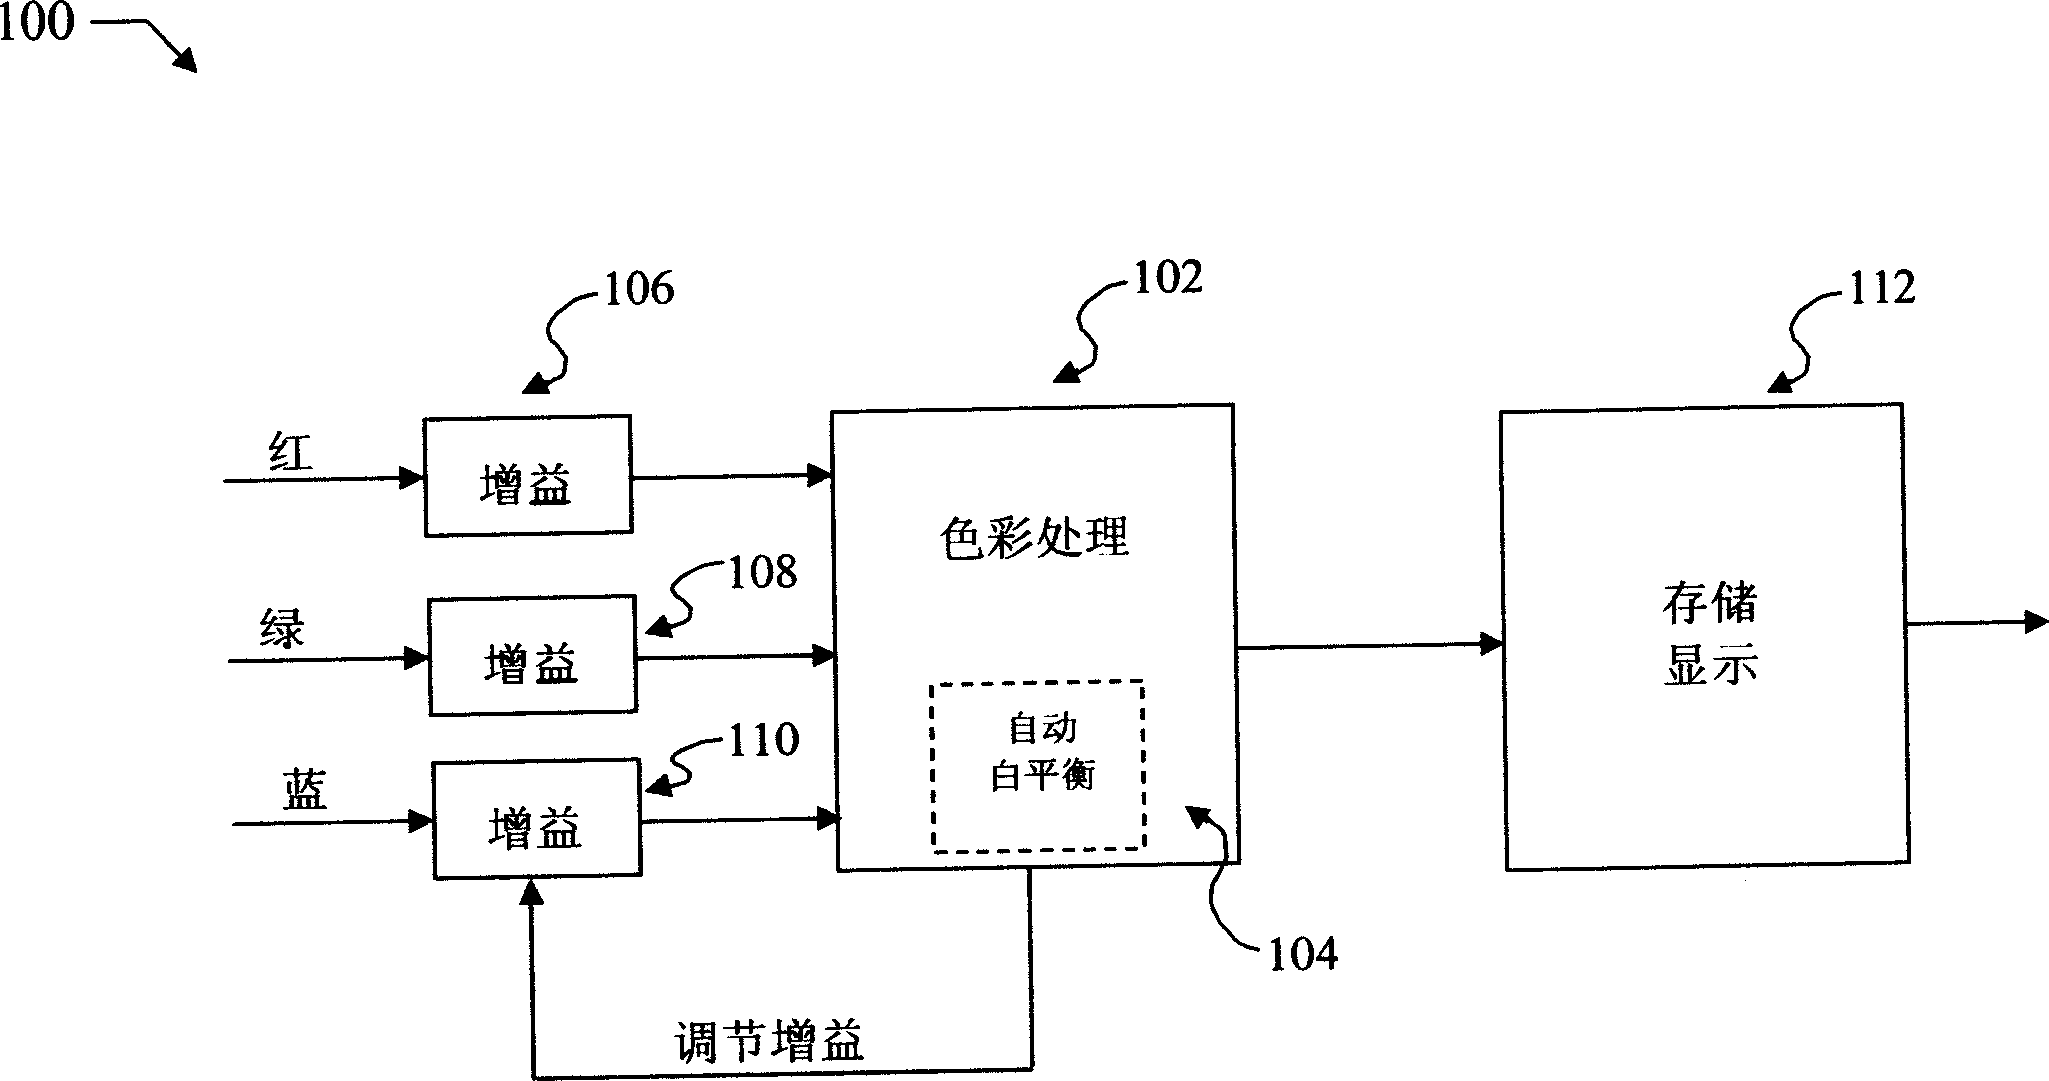 Method and apparatus for automatic white balance